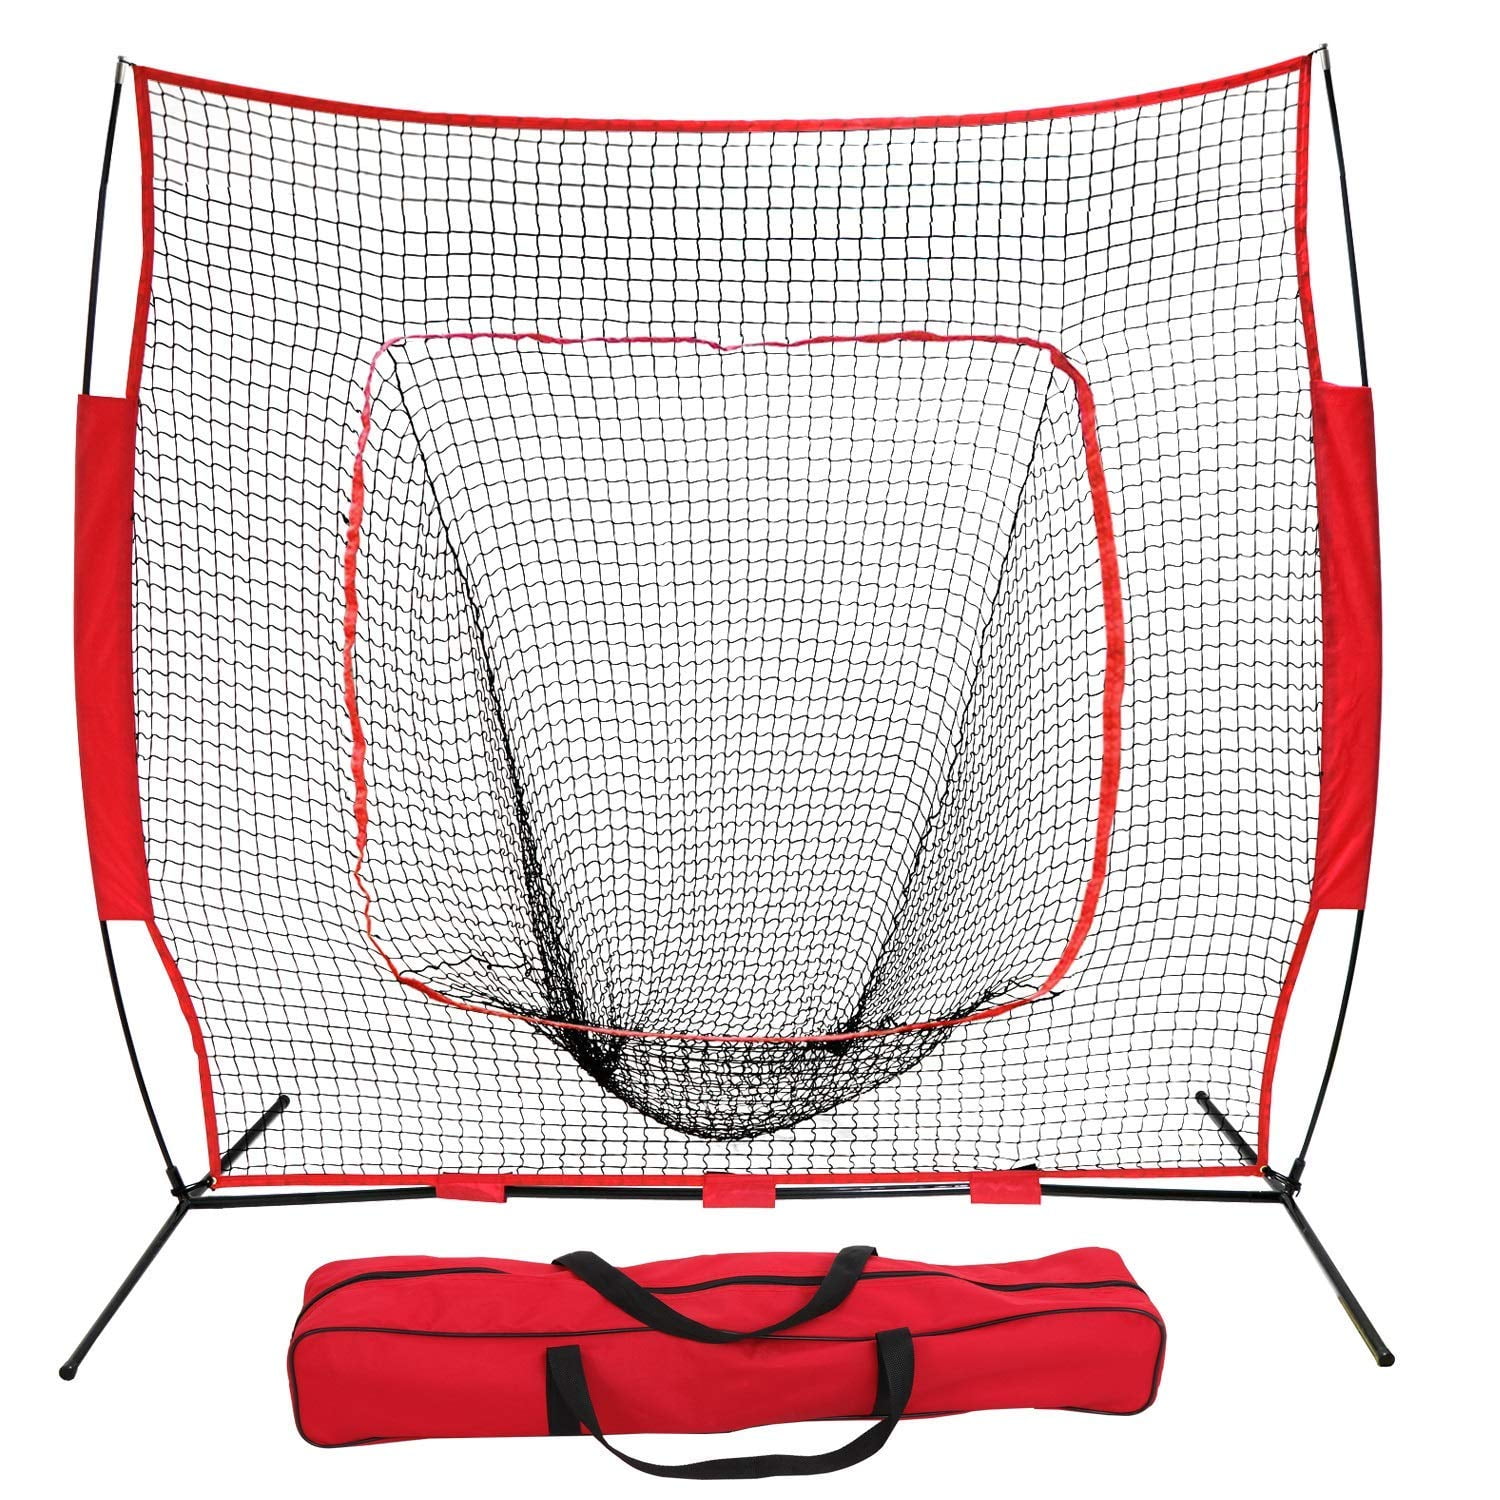 PEXMOR Portable Baseball Softball Practice Net 7x7 Deluxe Batting Tee Weighted Base Height Adjustable Stand for Practice Hitting,Pitching,Batting,Fielding,Backstop,Training Aid Strike Zone 